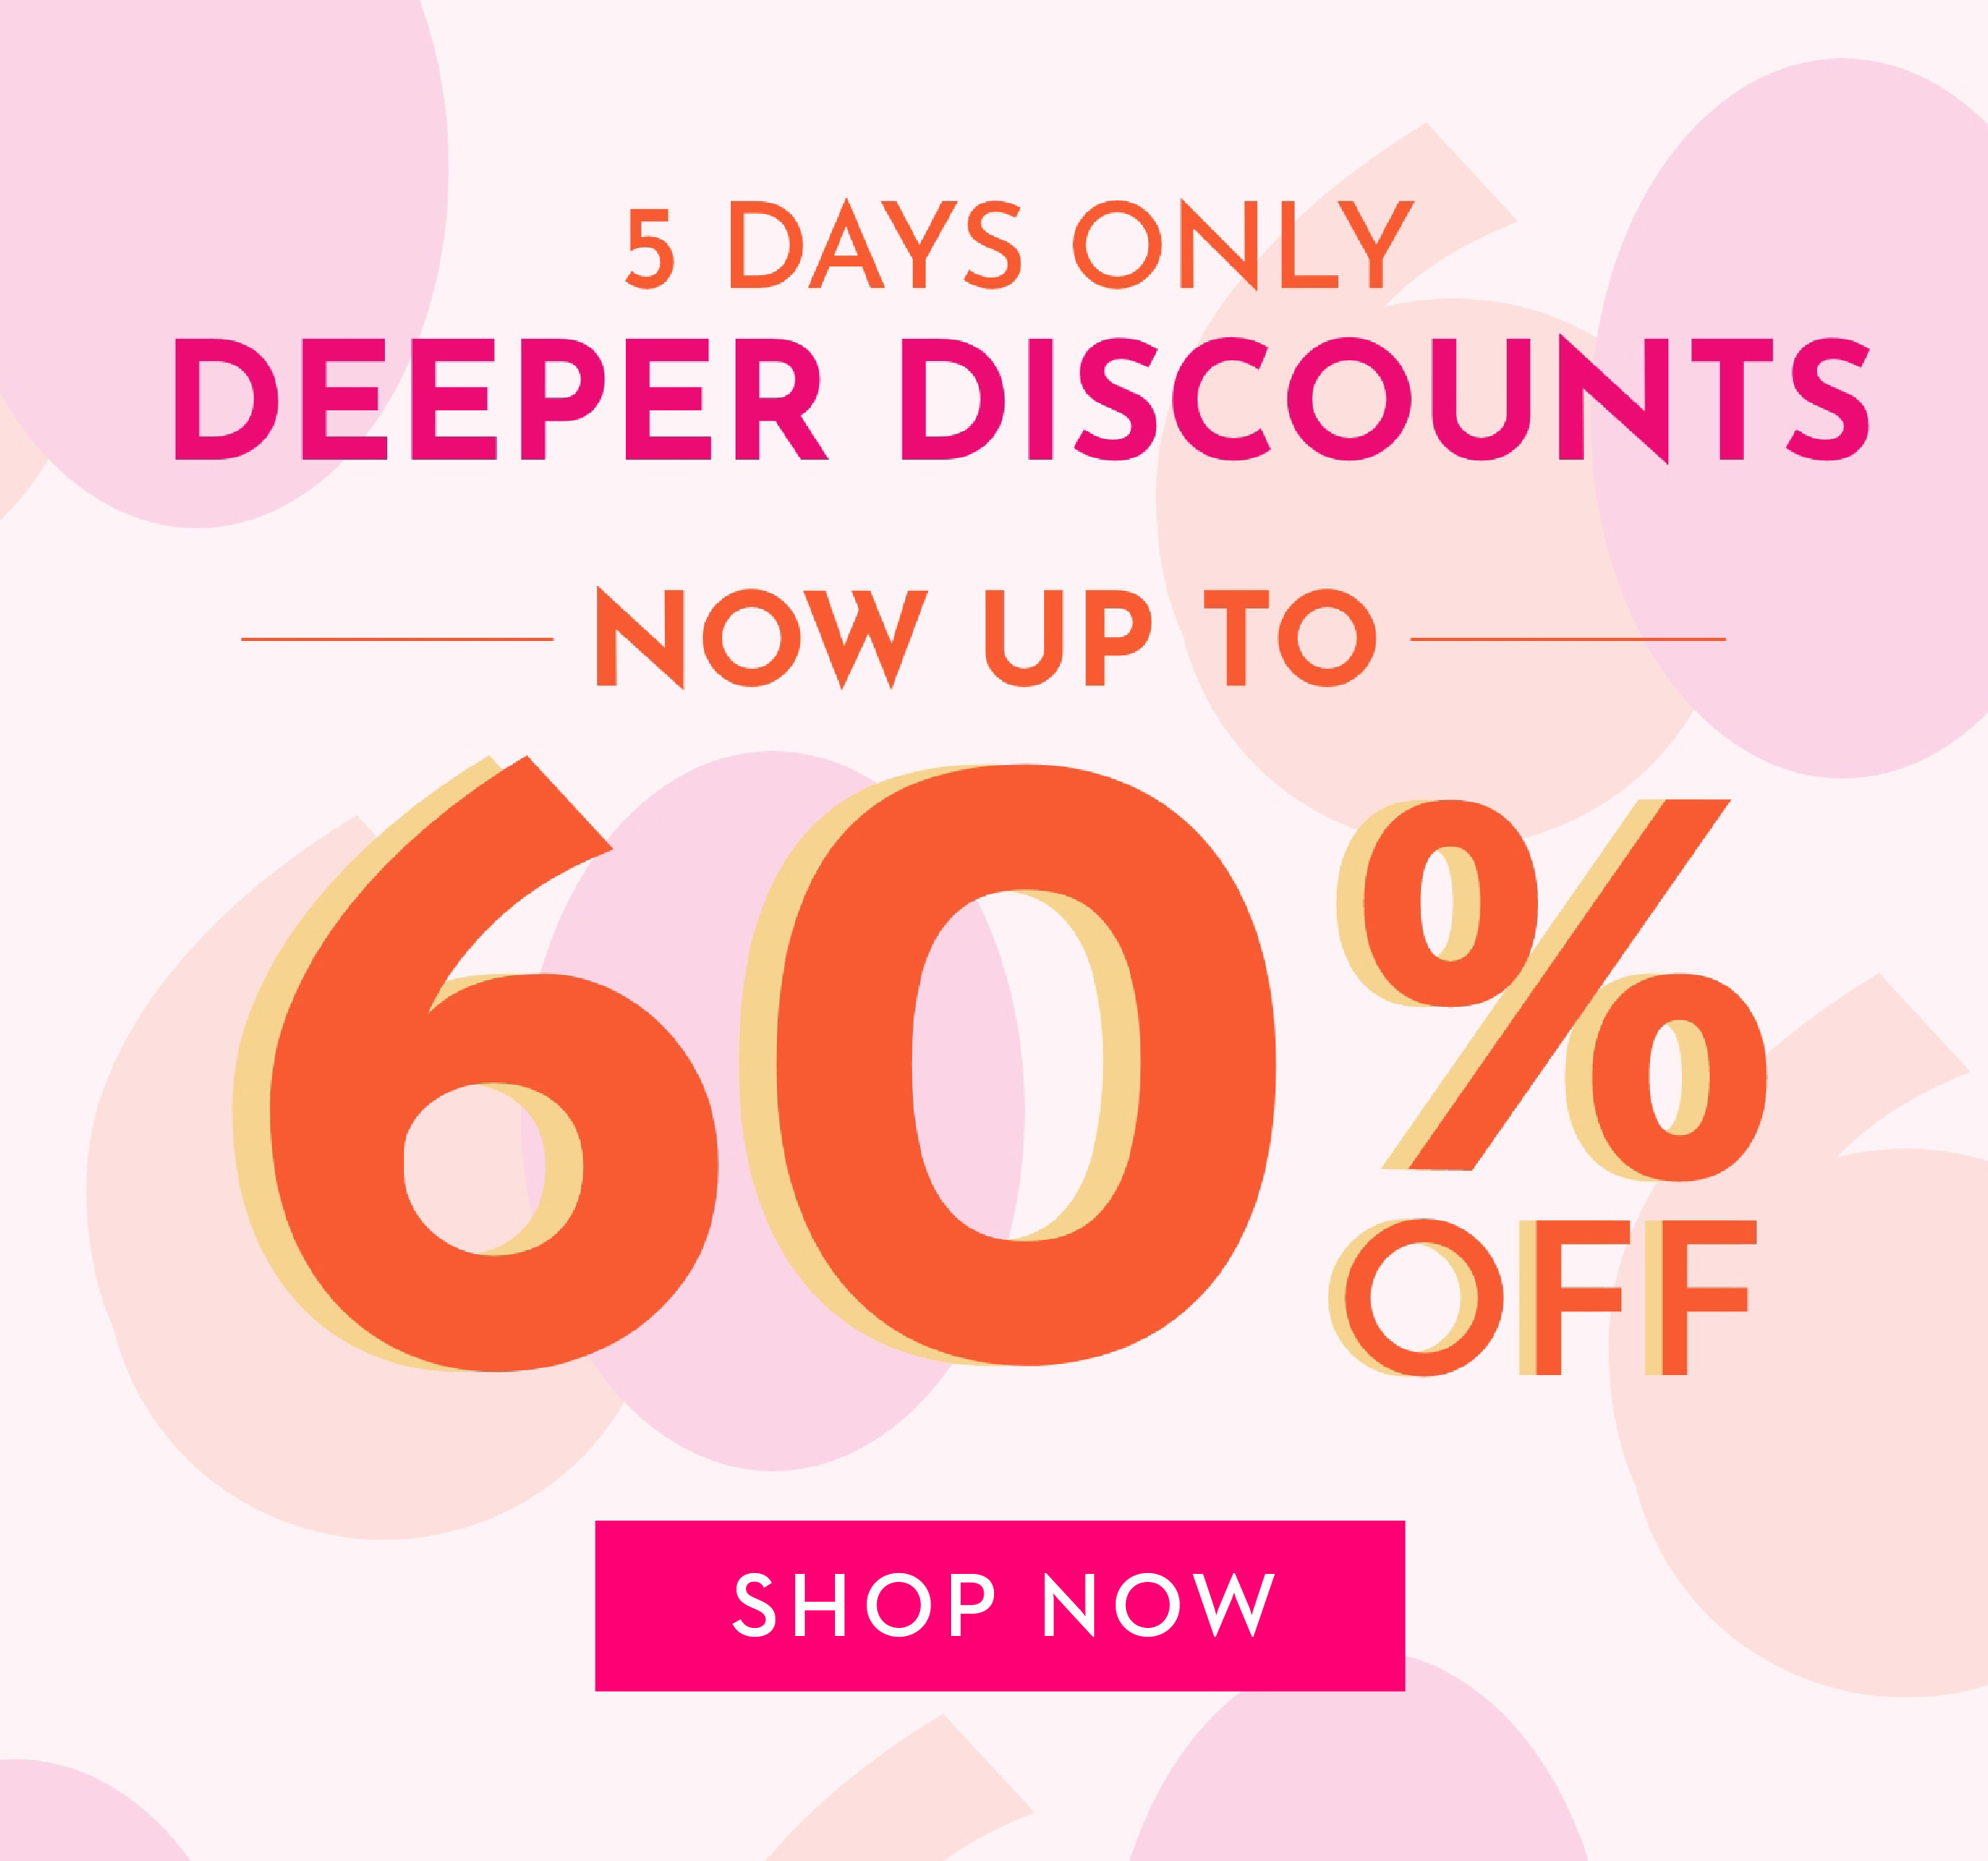 5 DAYS ONLY DEEPER DISCOUNTS NOW UP TO 60% OFF | SHOP NOW